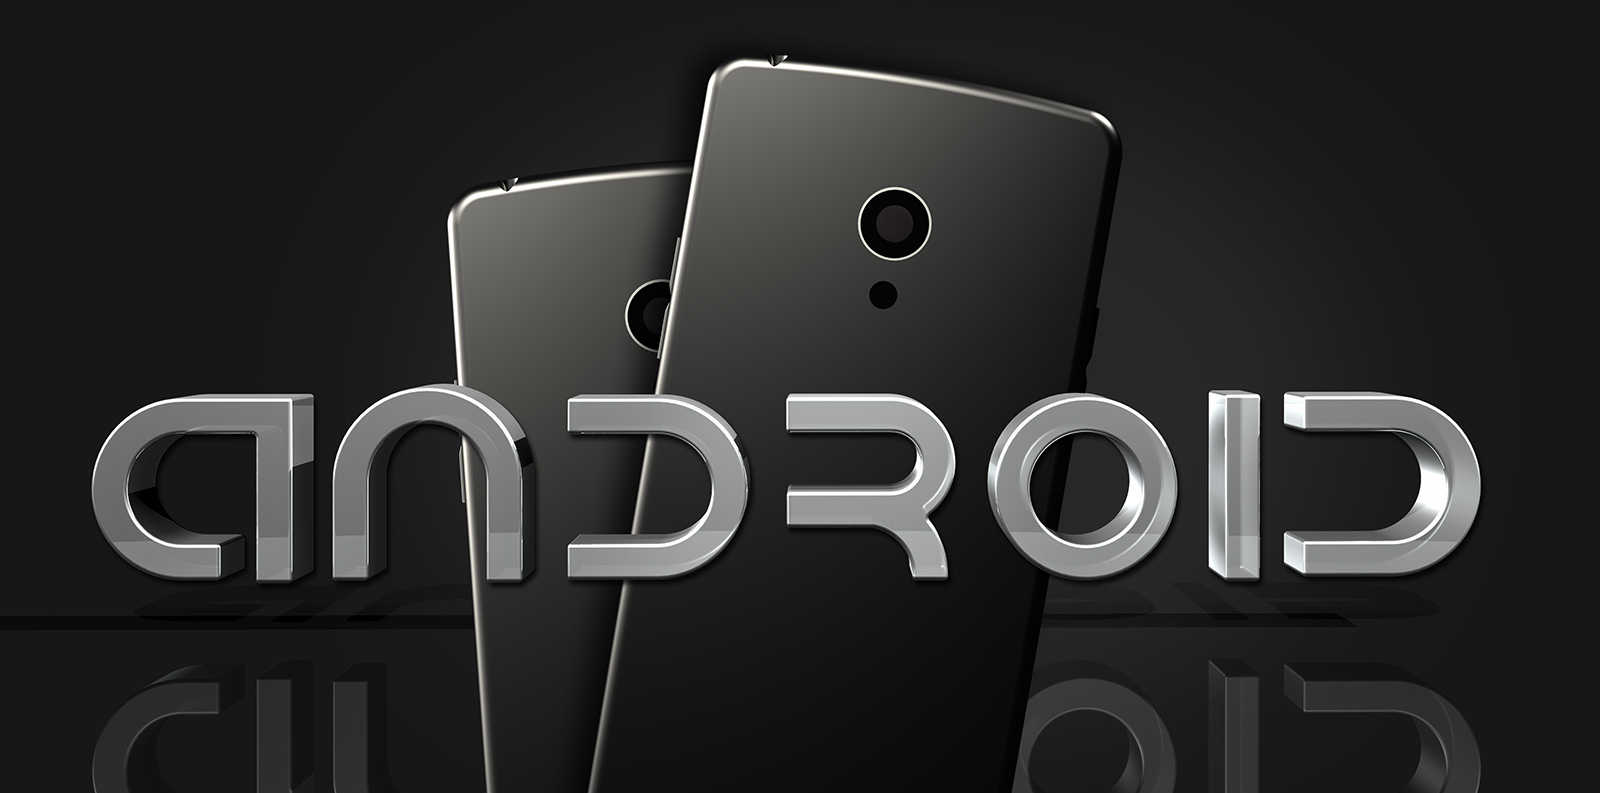 3d android logos and smartphones